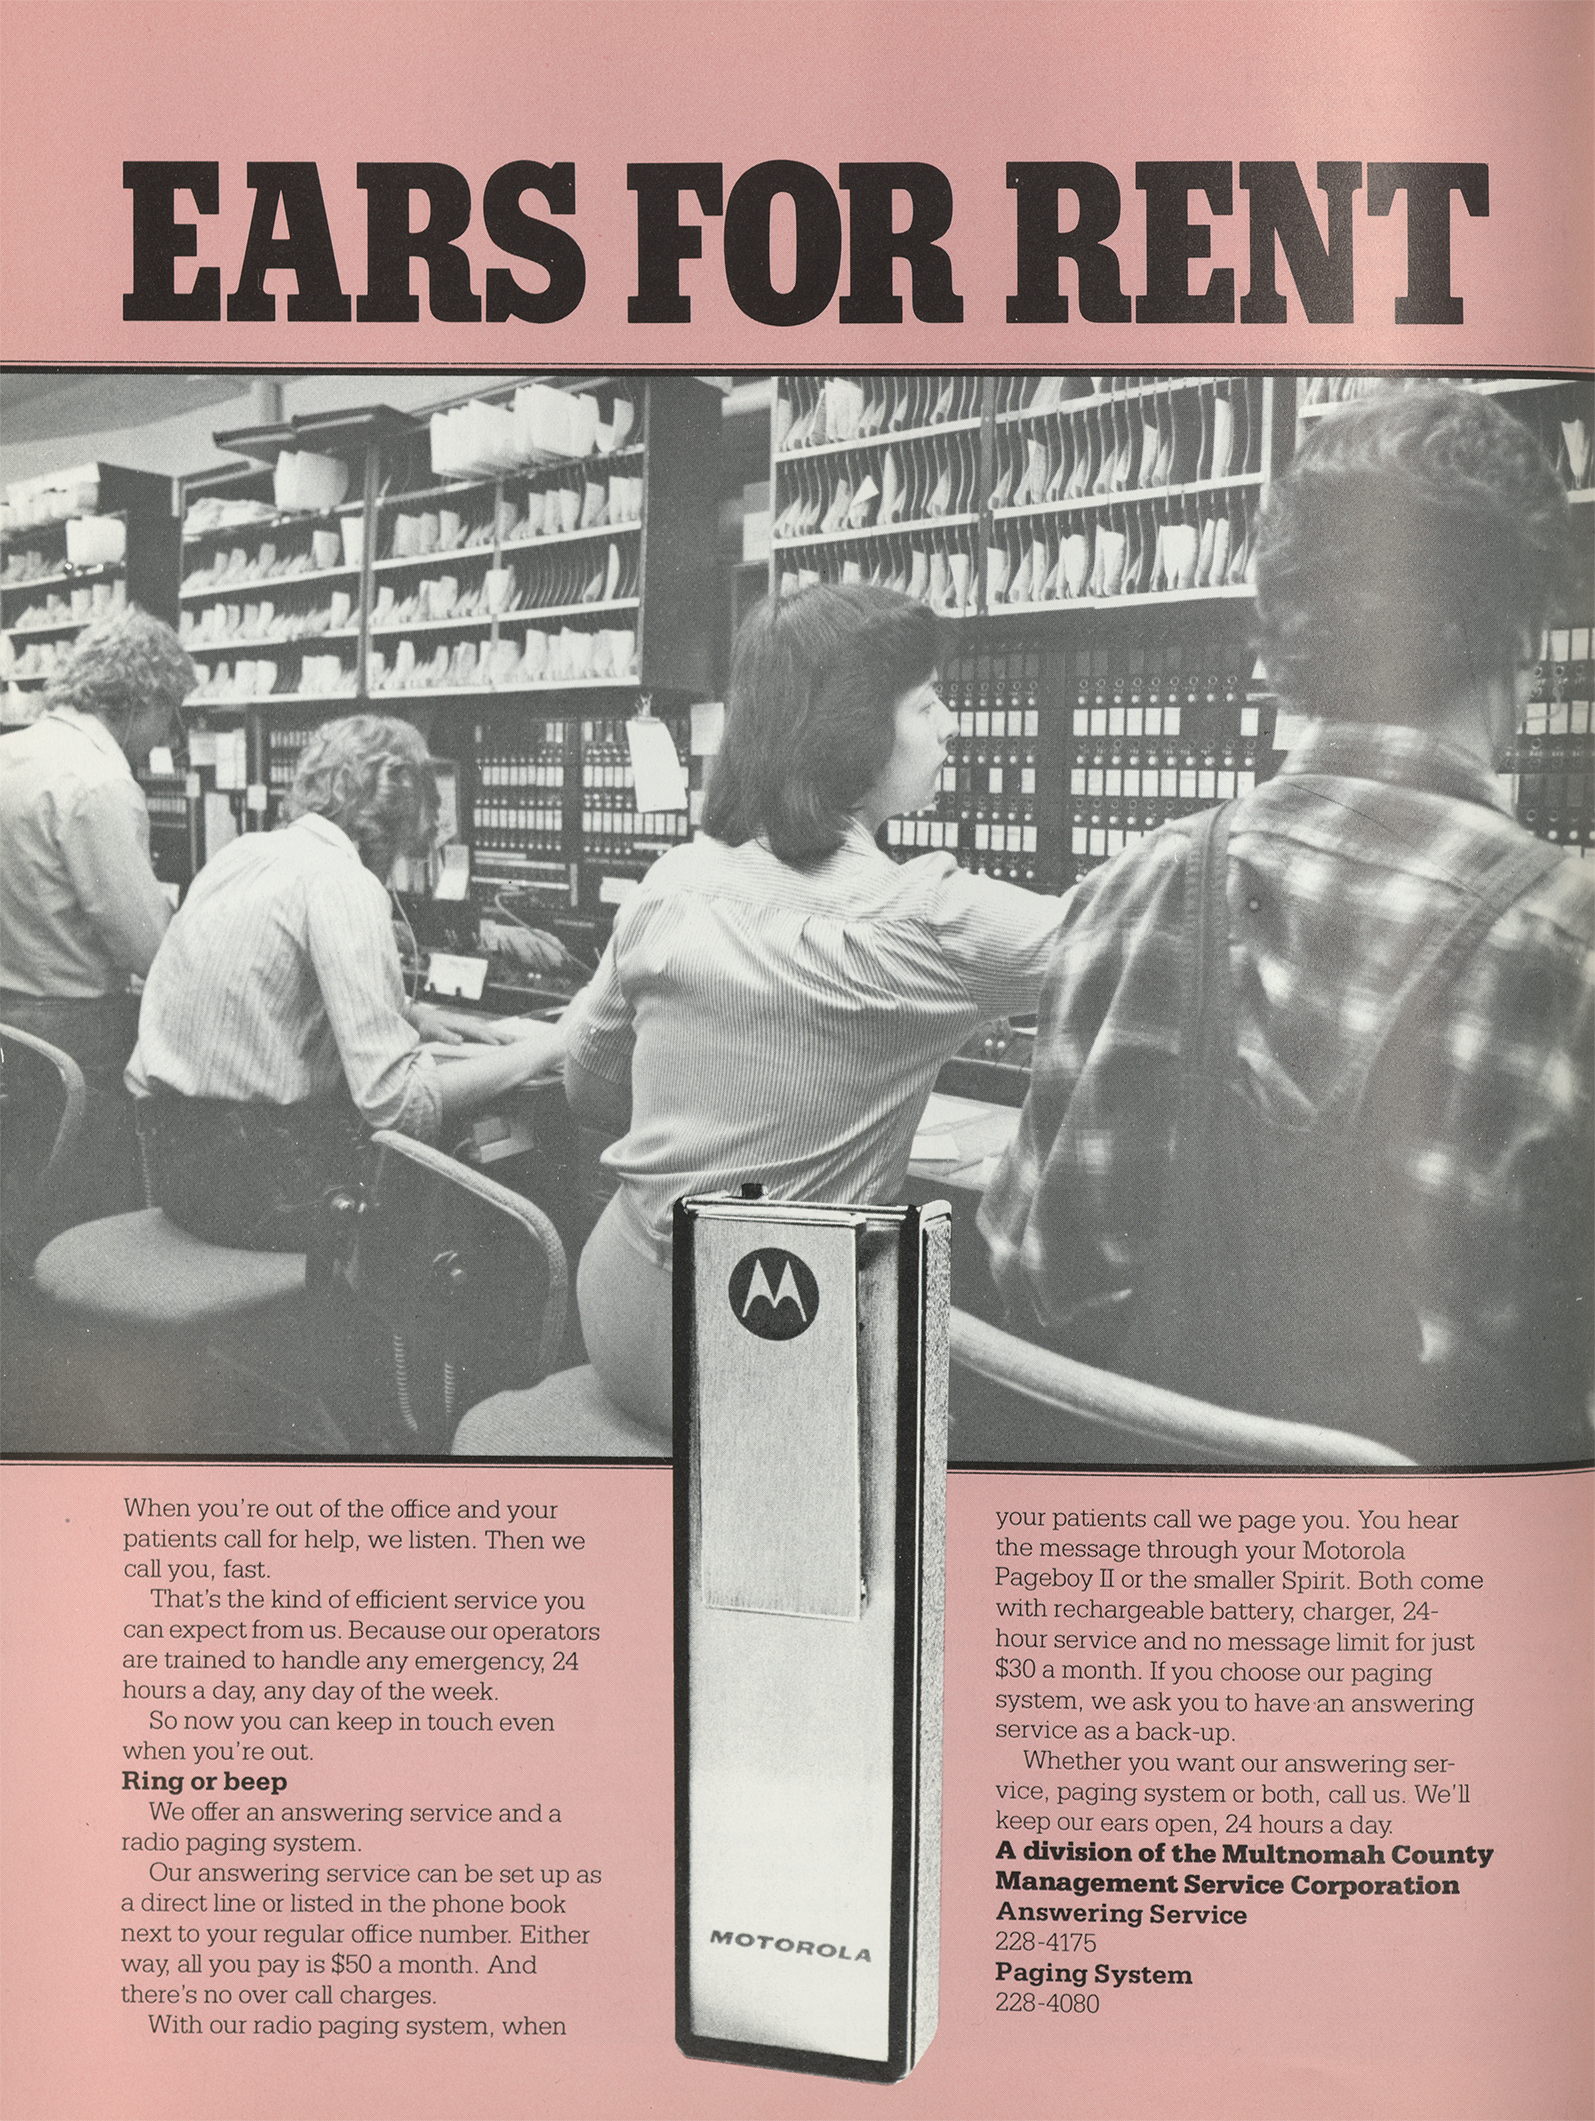 "Ears for Rent" advertisement for the Physicians Answering Service depicts operators at their switchboard